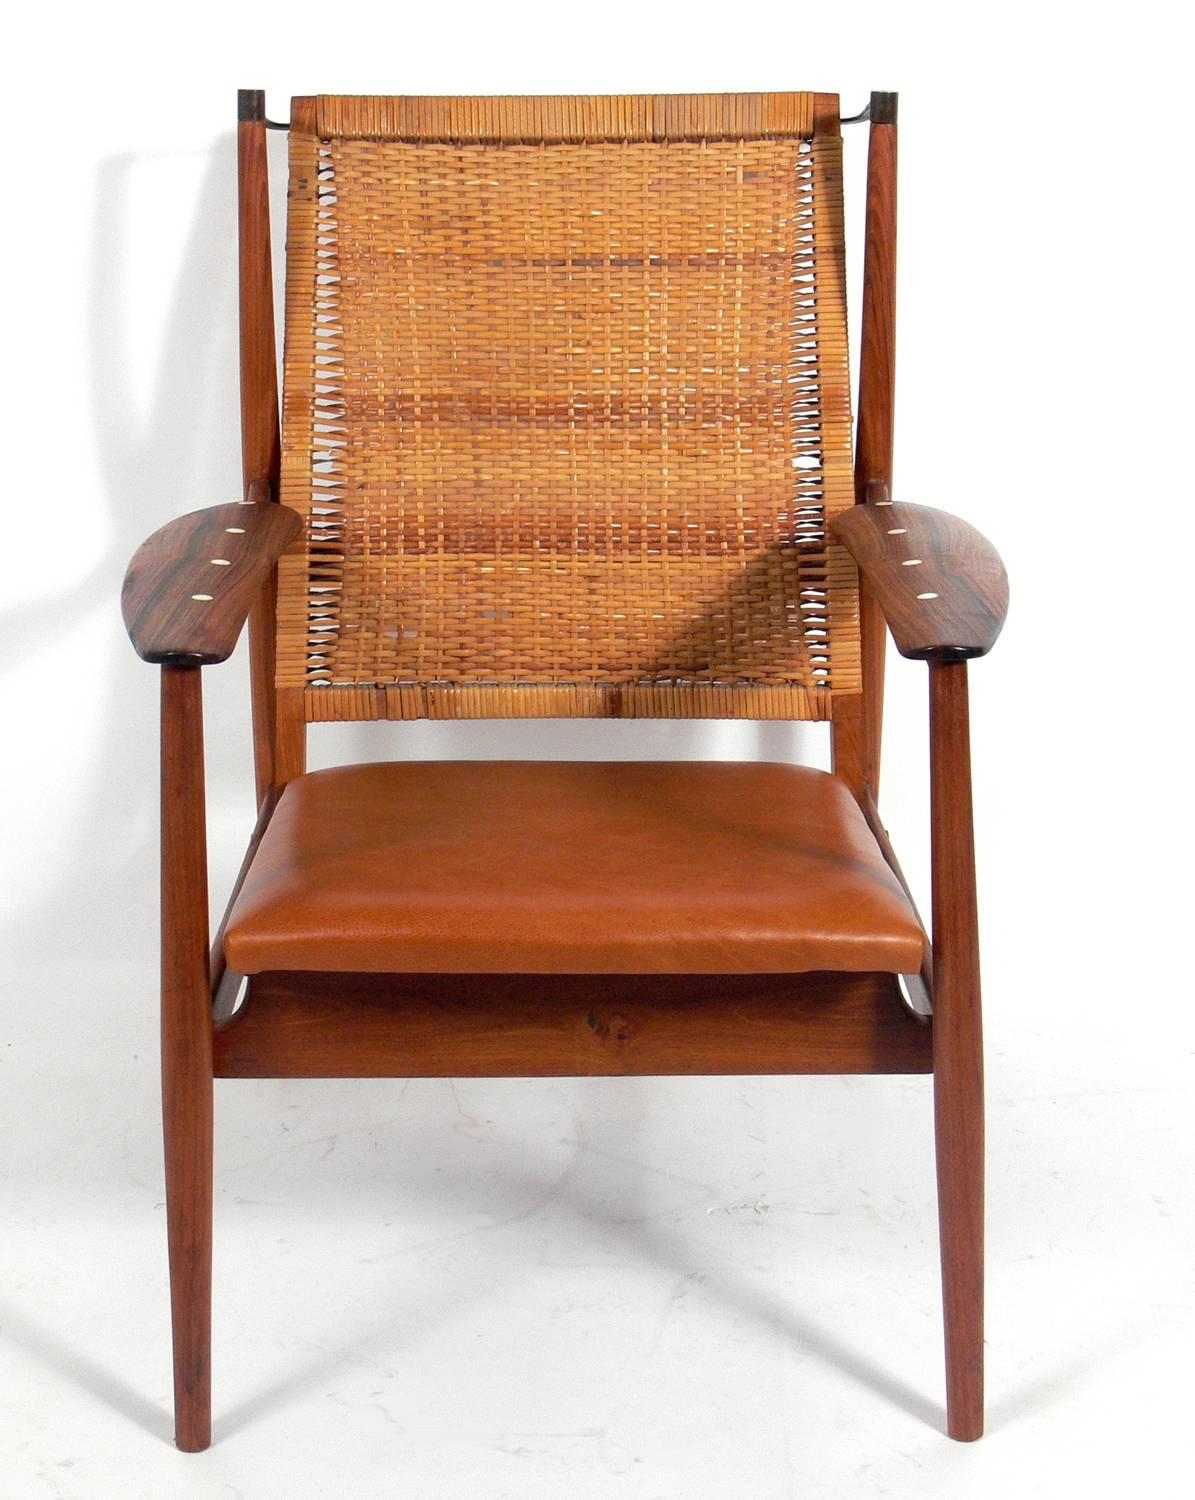 Danish modern lounge chair in the manner of Finn Juhl's NV-55 chair, Denmark, circa 1960s. Constructed of a beautiful mix of materials including rosewood inlaid arms, teak, brass, woven cane and cognac color leather. Retains warm original patina.